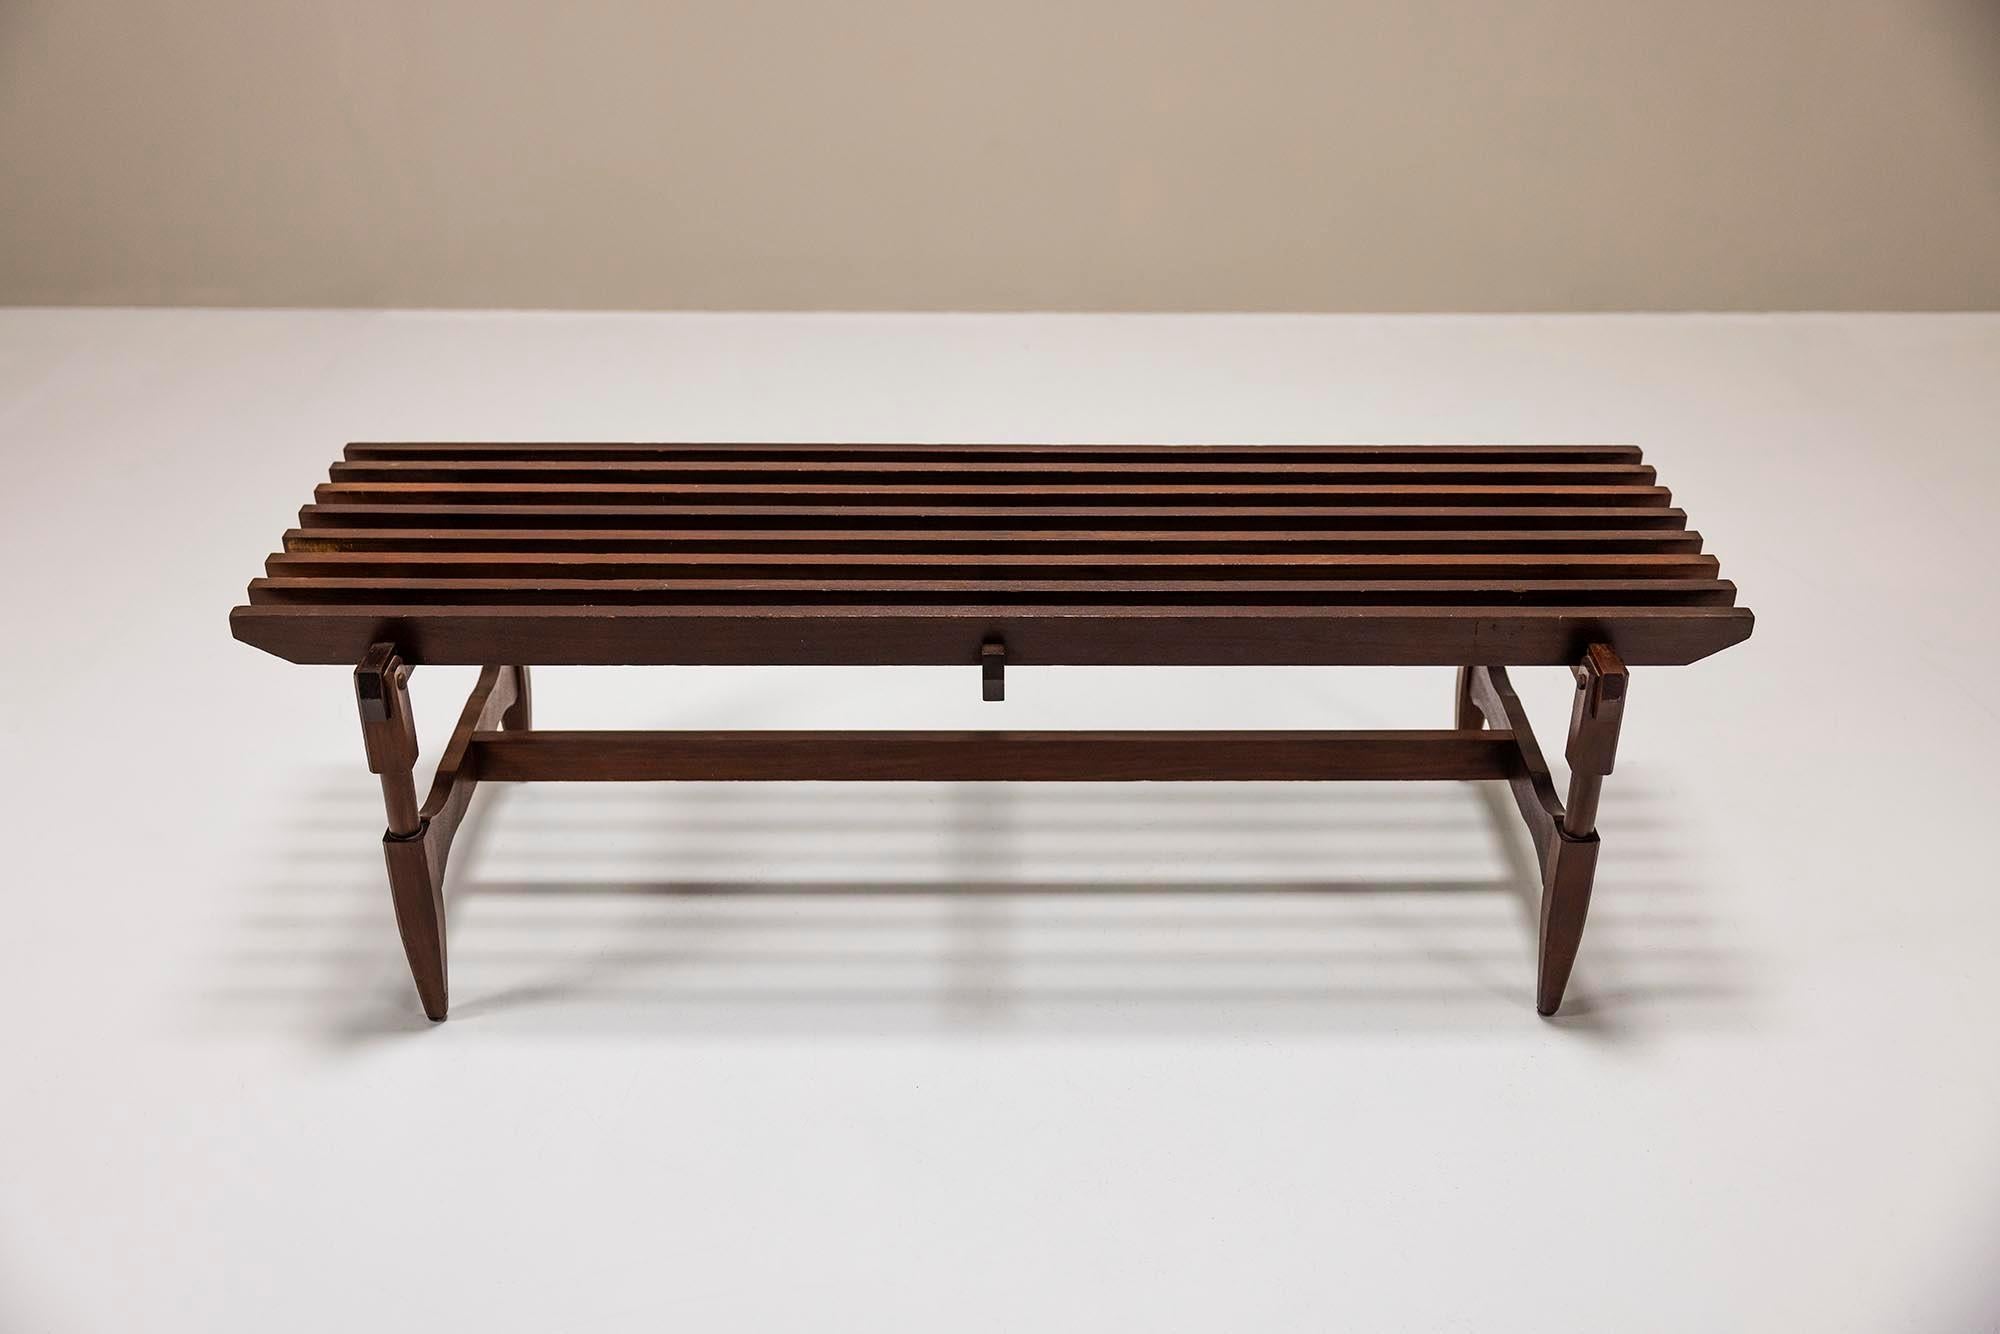 Mid-20th Century Slatted Bench In Meranti Wood, Italy 1950s For Sale